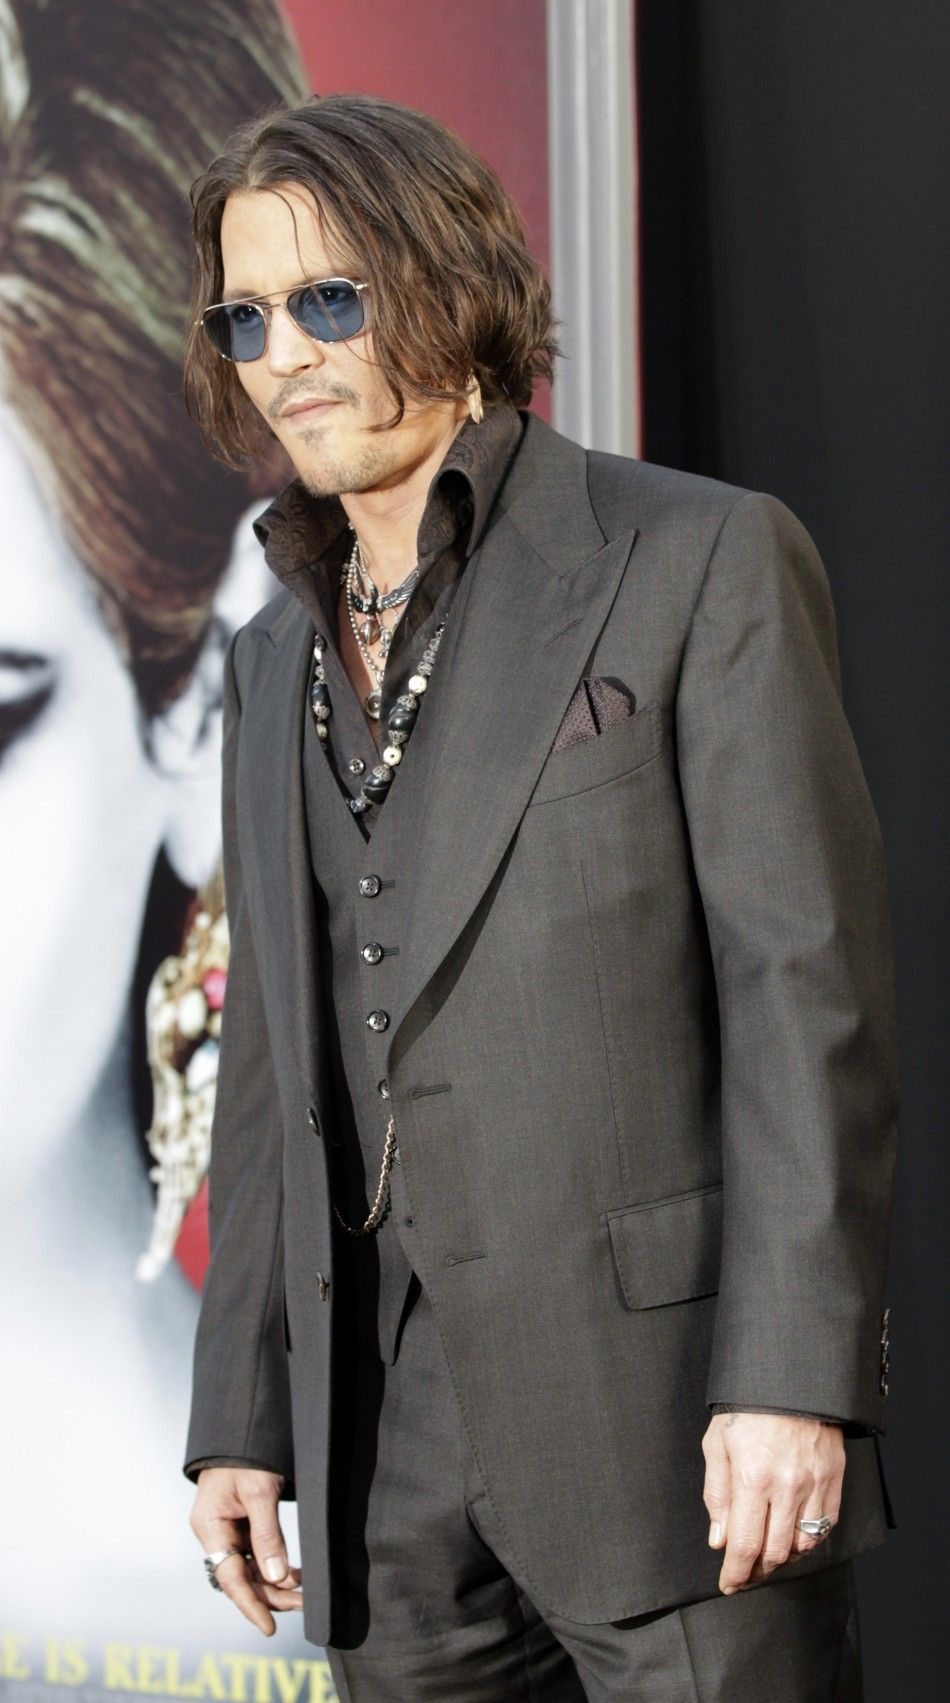 Cast member Johnny Depp poses at the premiere of the film quotDark Shadowsquot at the Graumans Chinese theatre in Hollywood, California May 7, 2012.